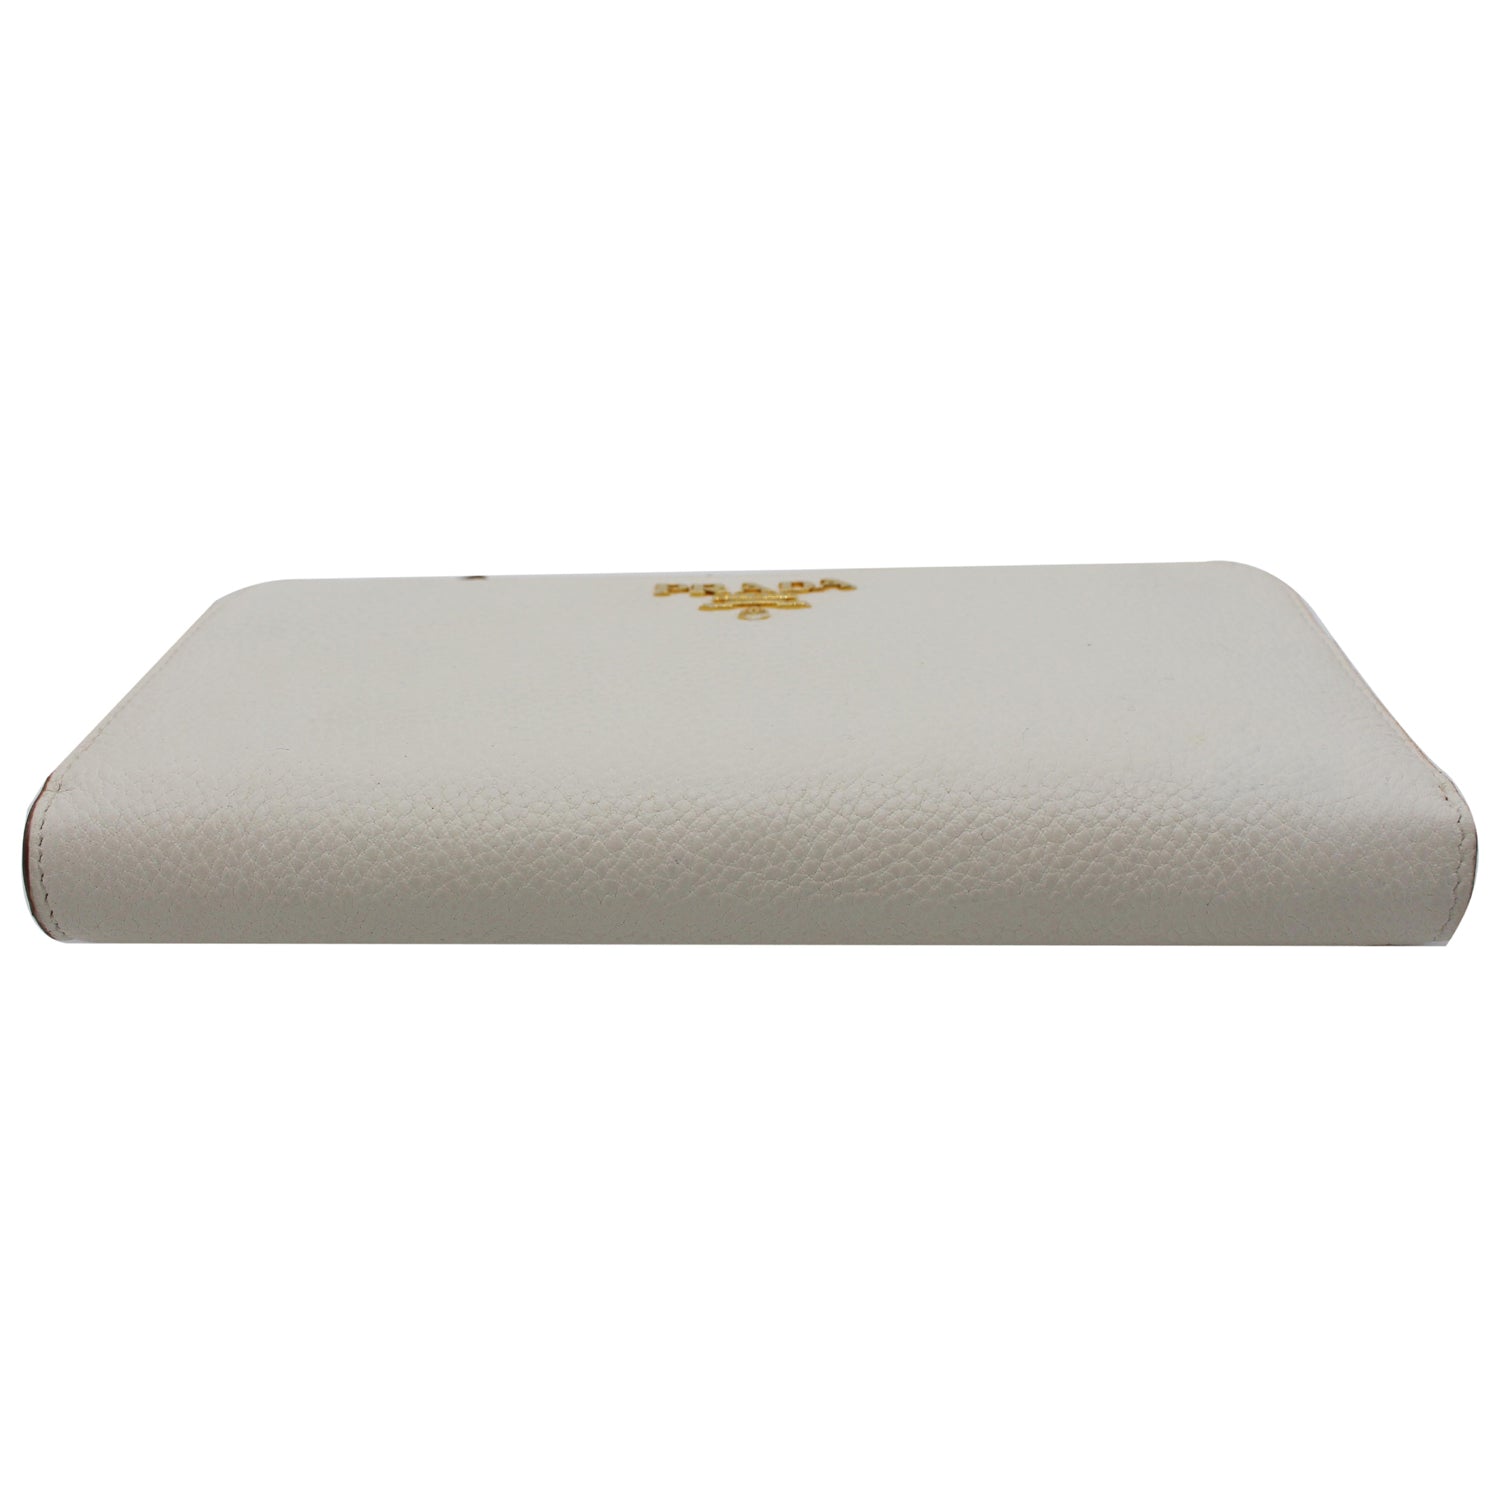 PRADA Saffiano Leather Long Wallet White - 15% OFF